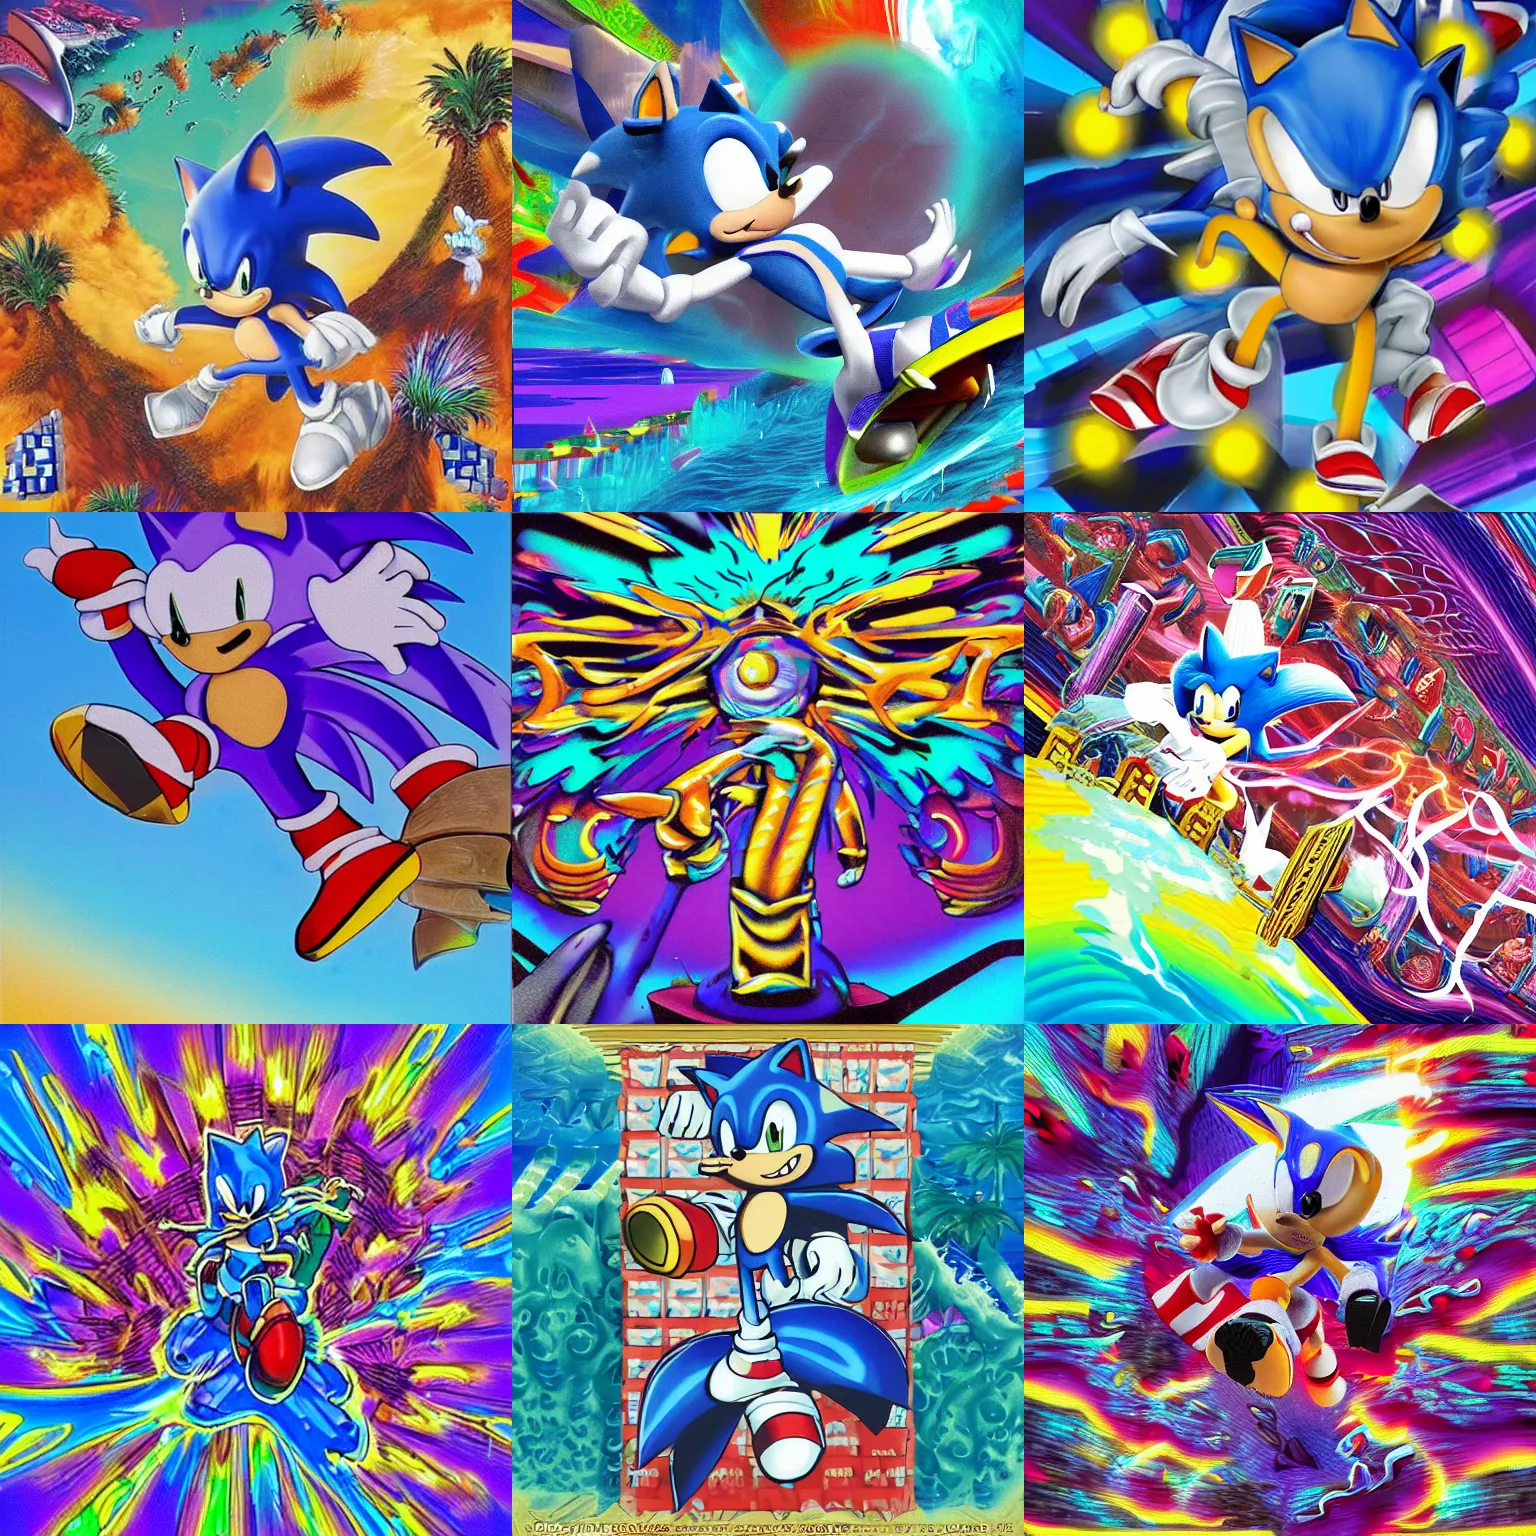 Prompt: sonic the hedgehog in a surreal, sharp, detailed professional, high quality airbrush art MGMT album cover of a liquid dissolving LSD DMT blue sonic the hedgehog surfing through vaporwave, purple checkerboard background, 1990s 1992 Sega Genesis video game album cover